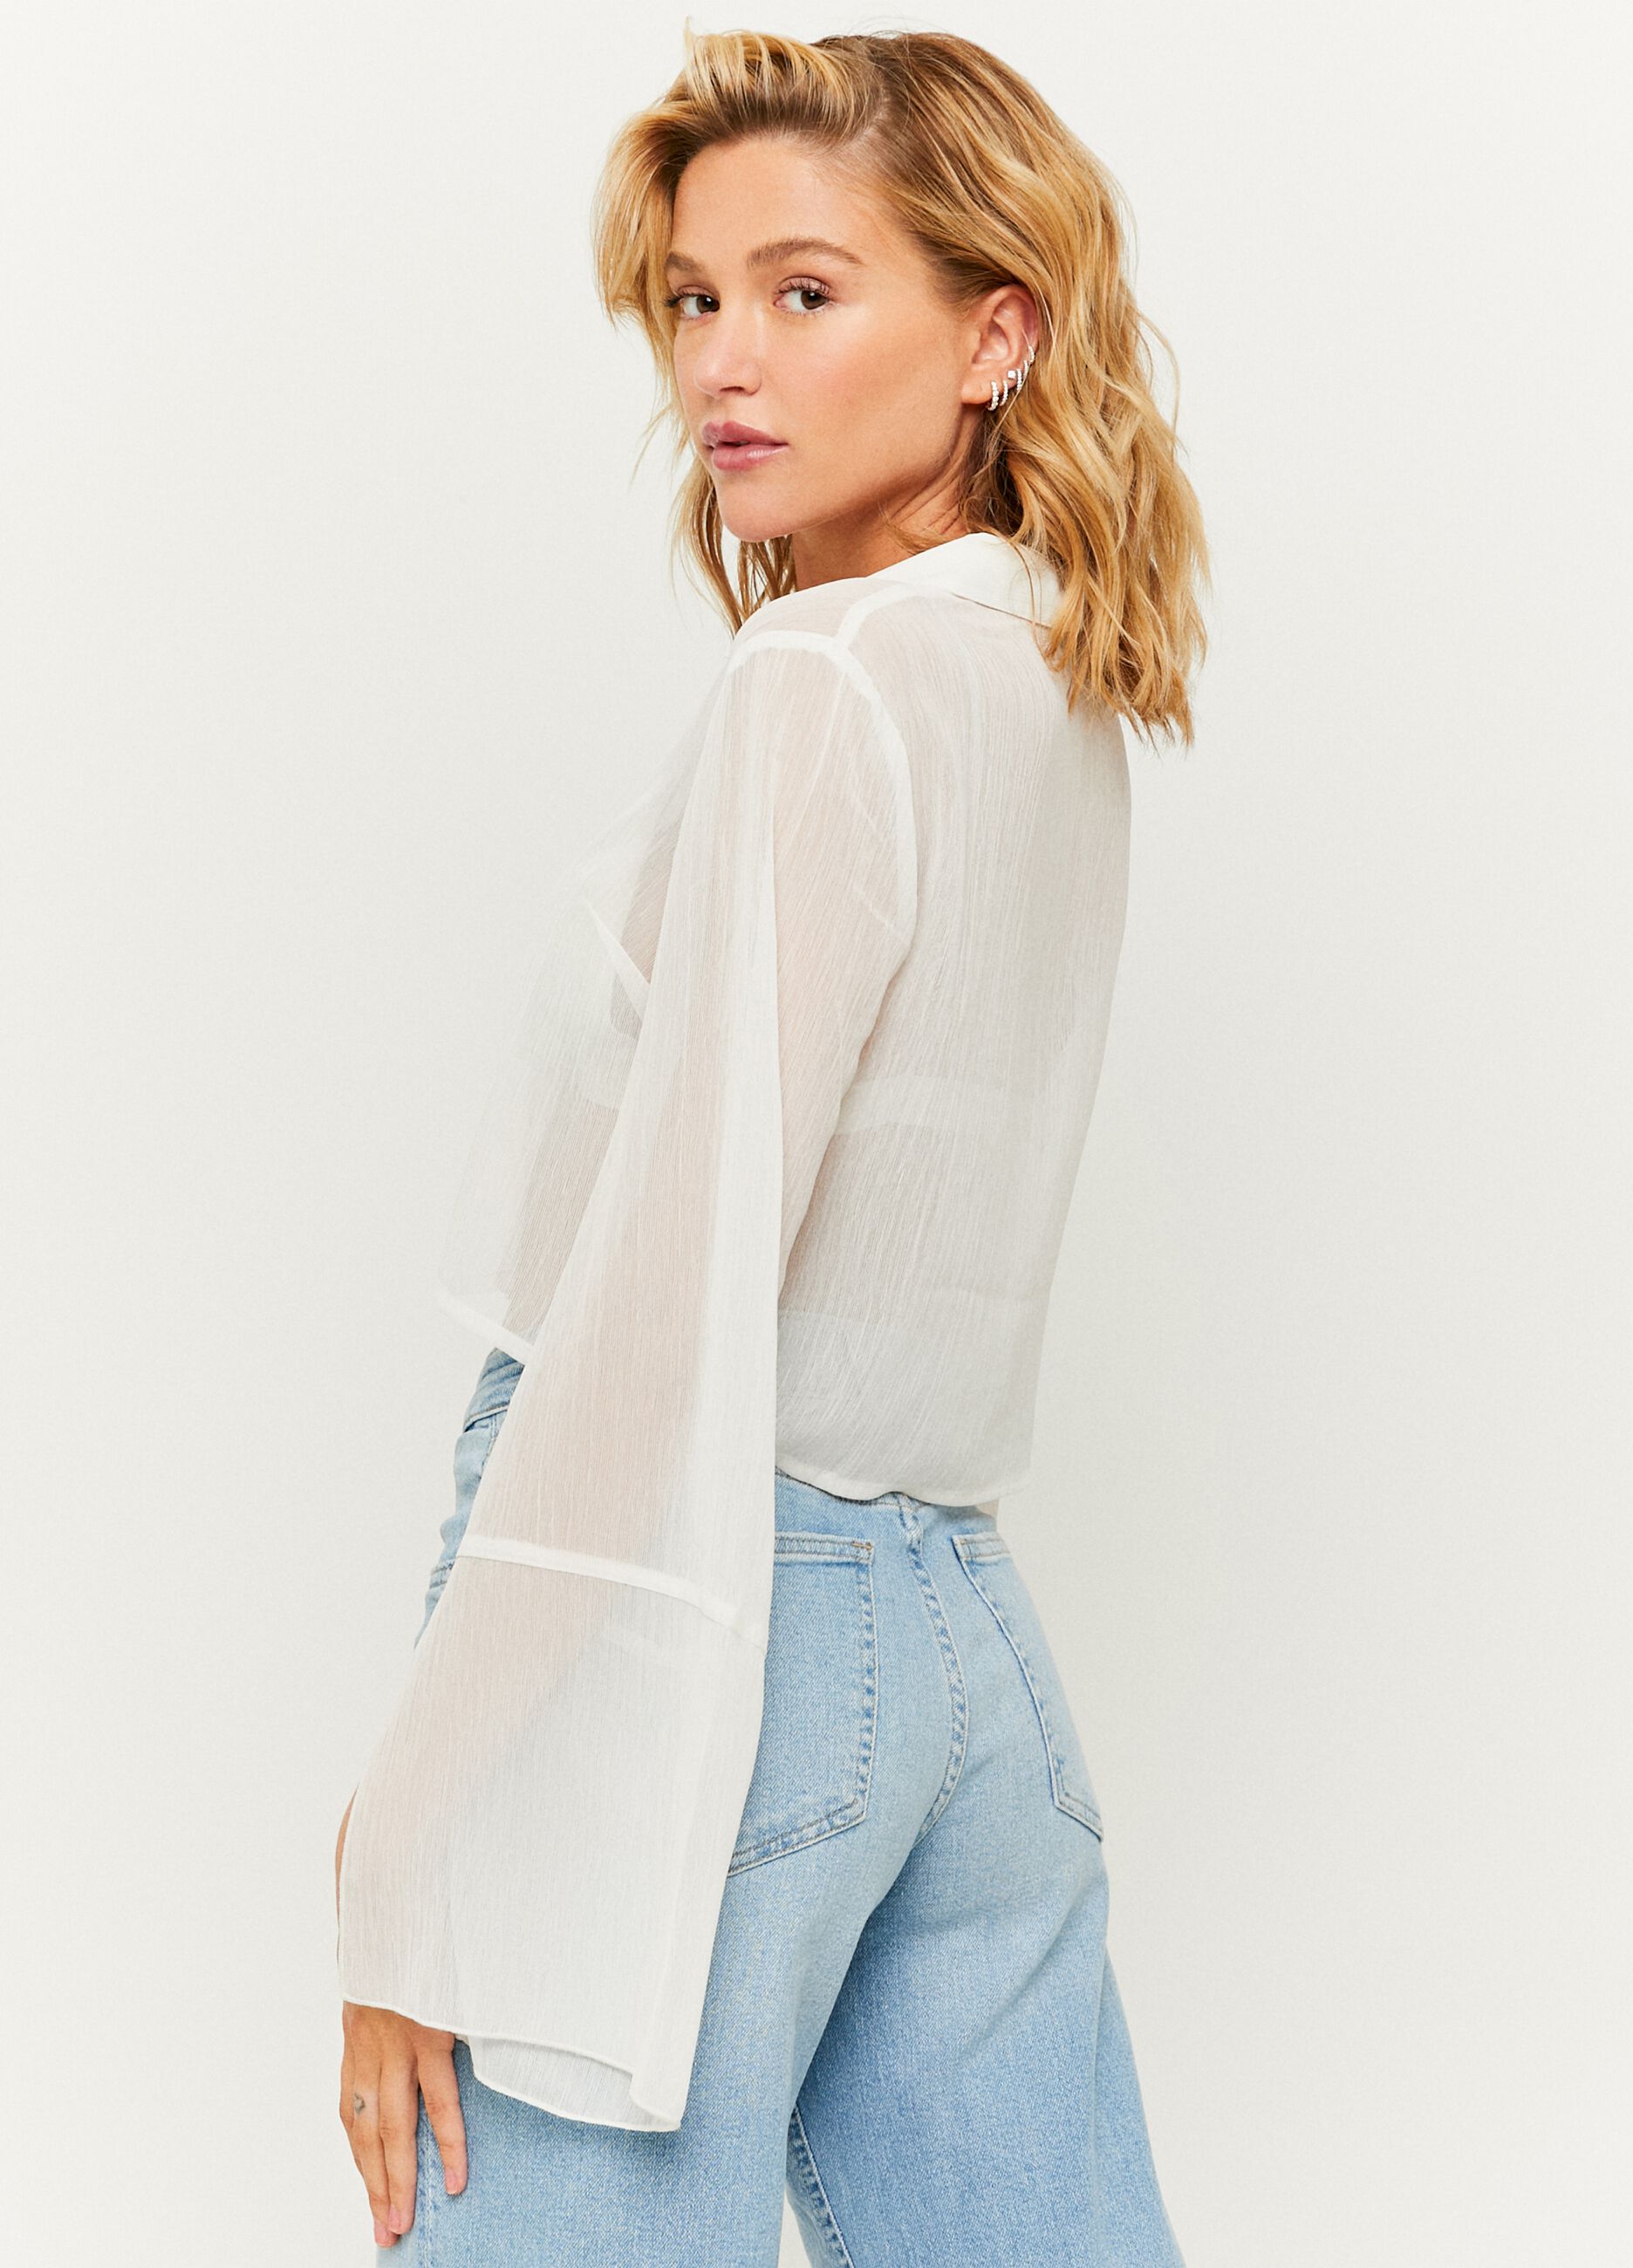 Semi-sheer blouse with flared sleeves